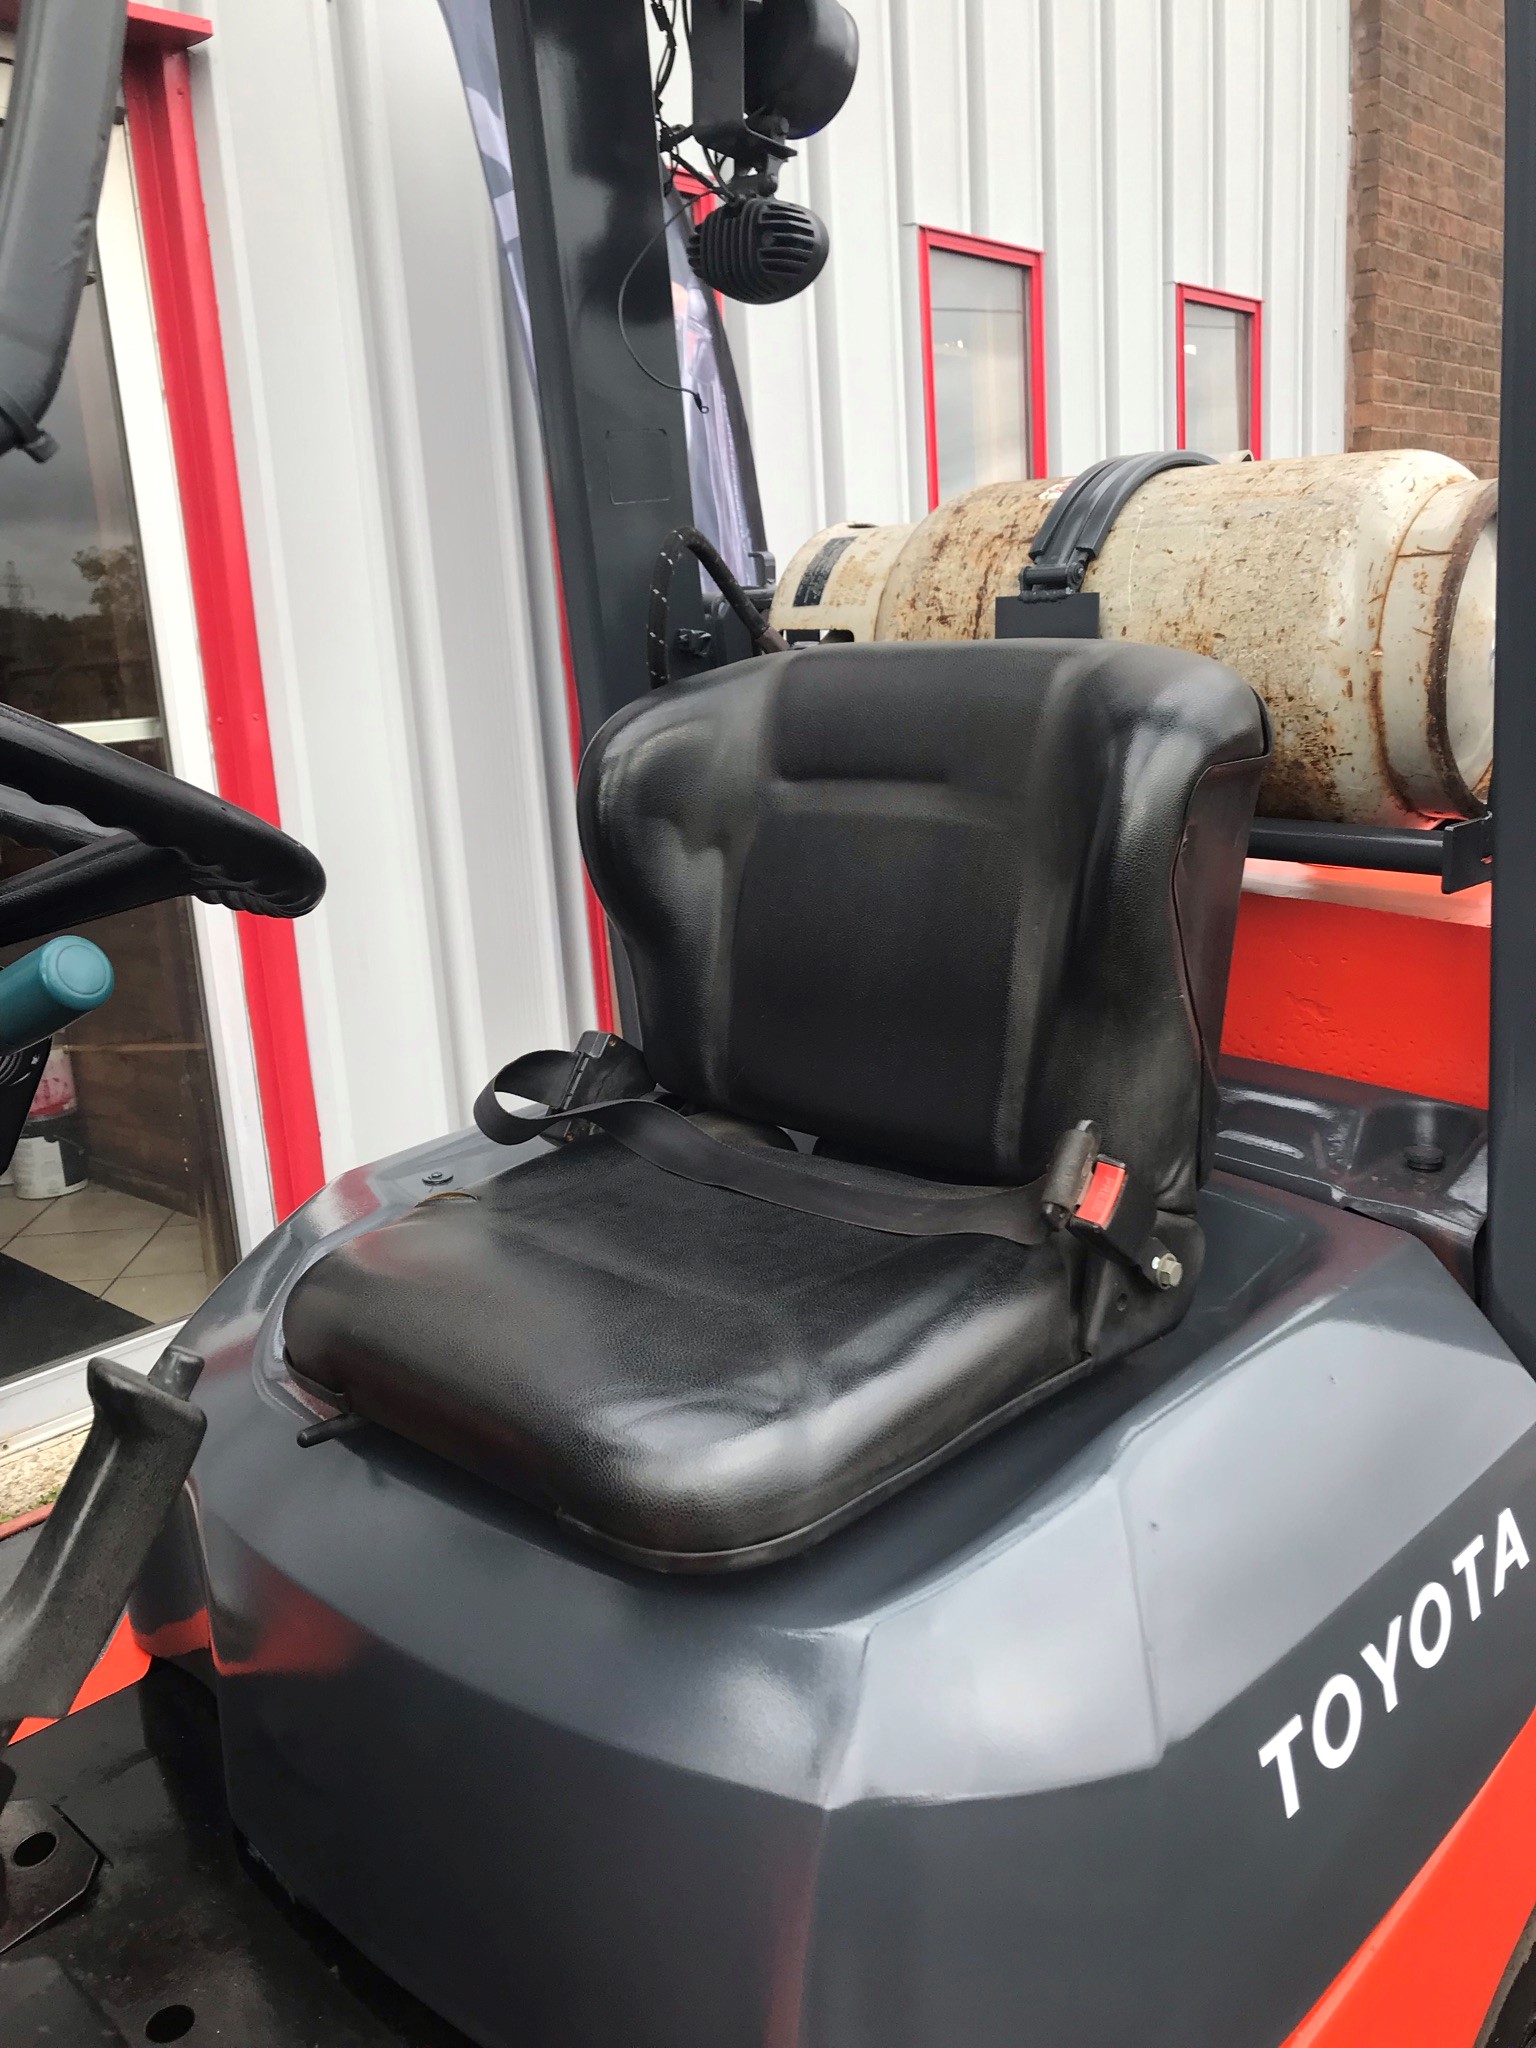 Orange toyota forklift with power steering for sale